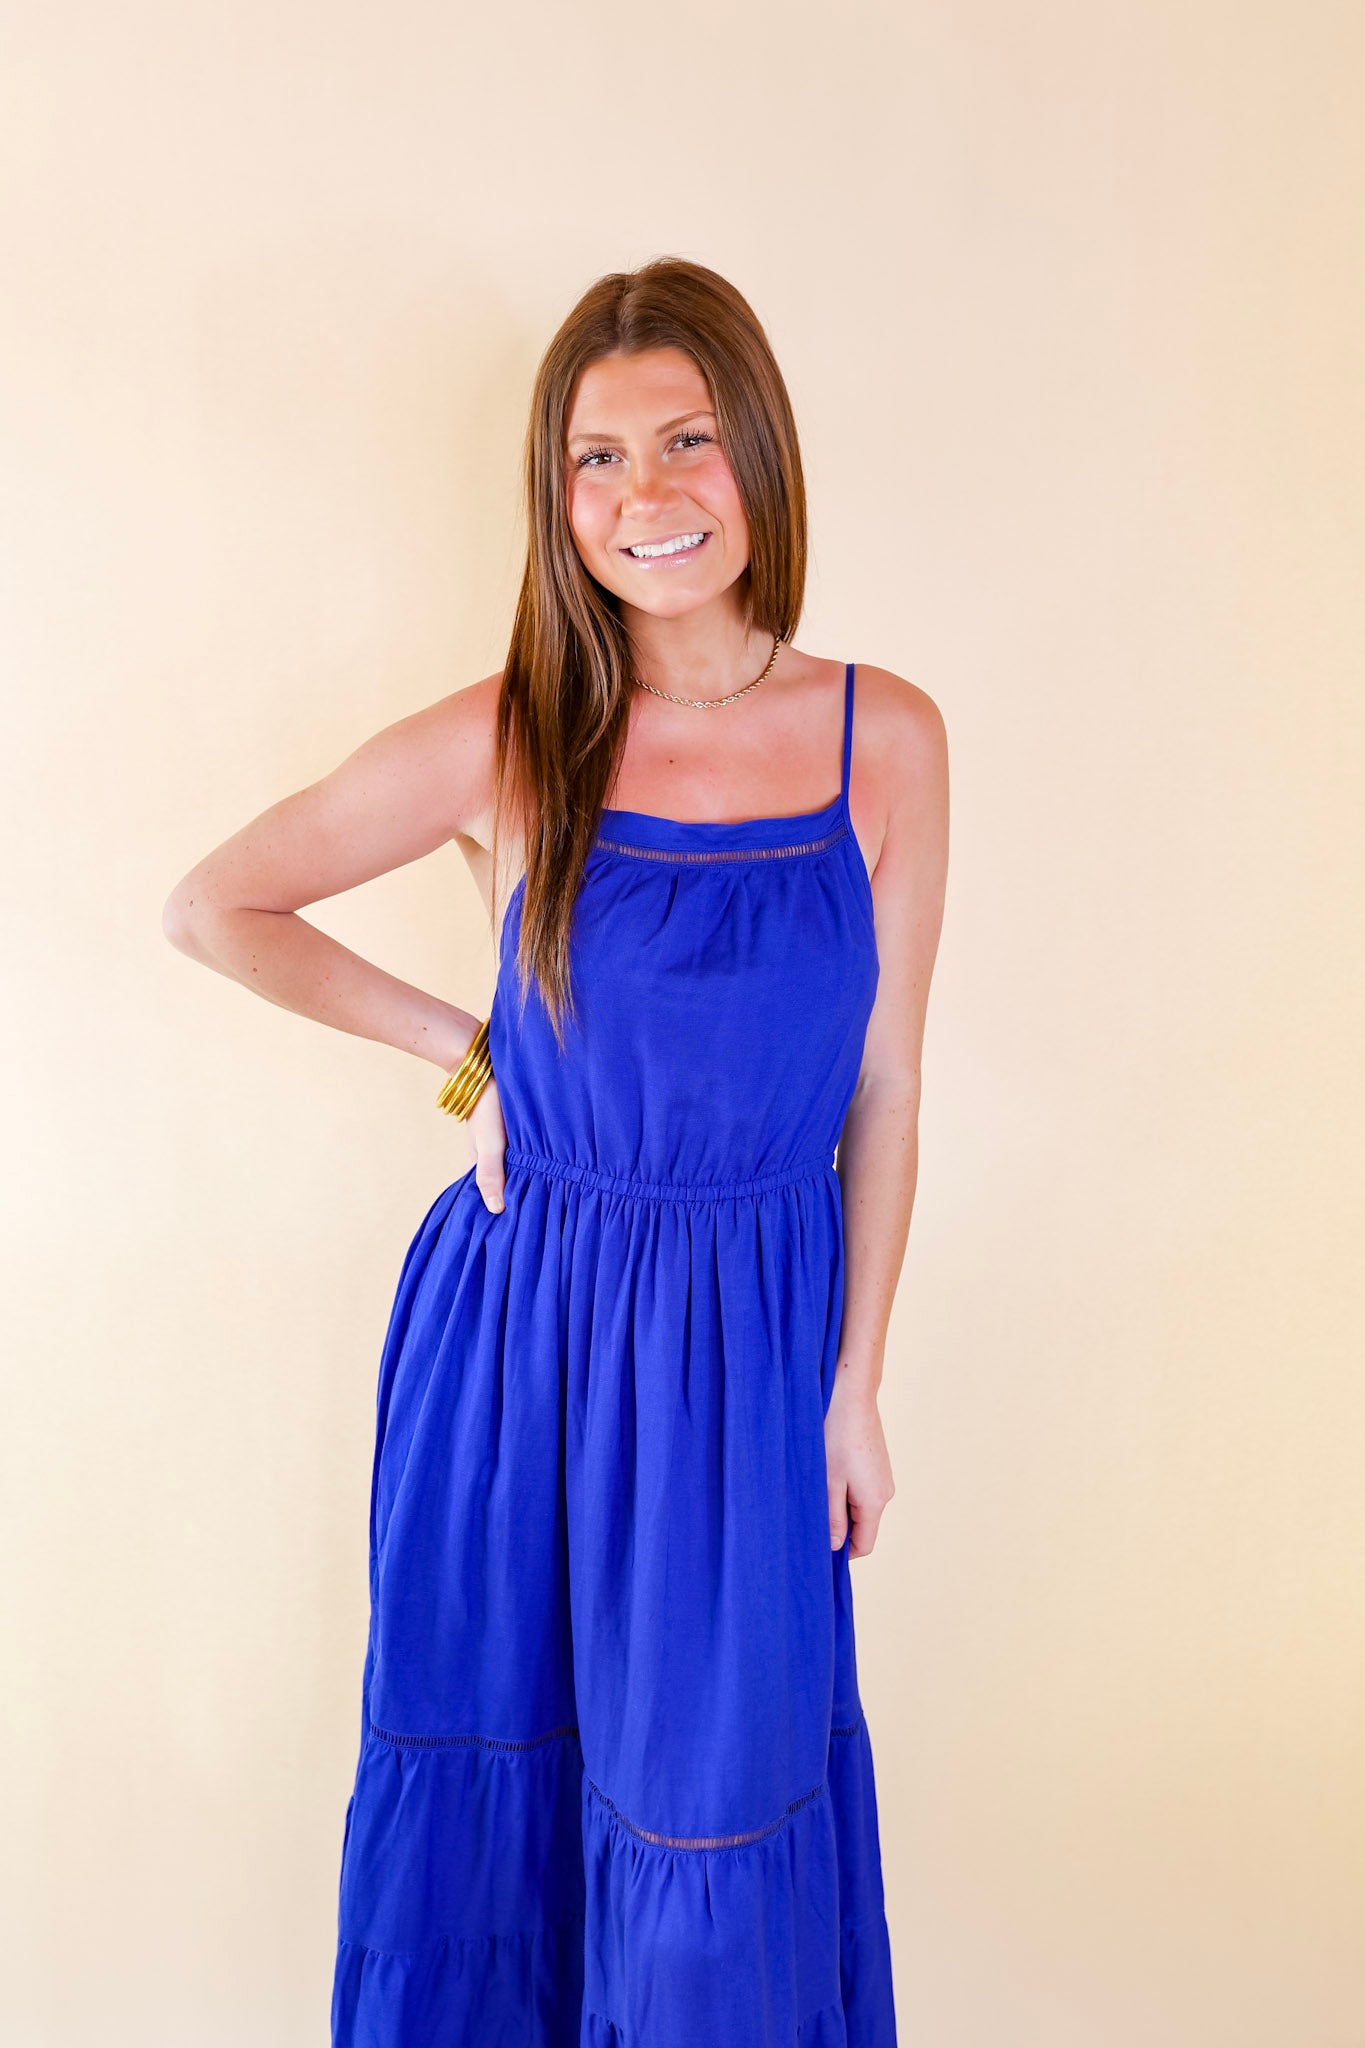 Tranquil Tides Tiered Maxi Dress in Royal Blue - Giddy Up Glamour Boutique